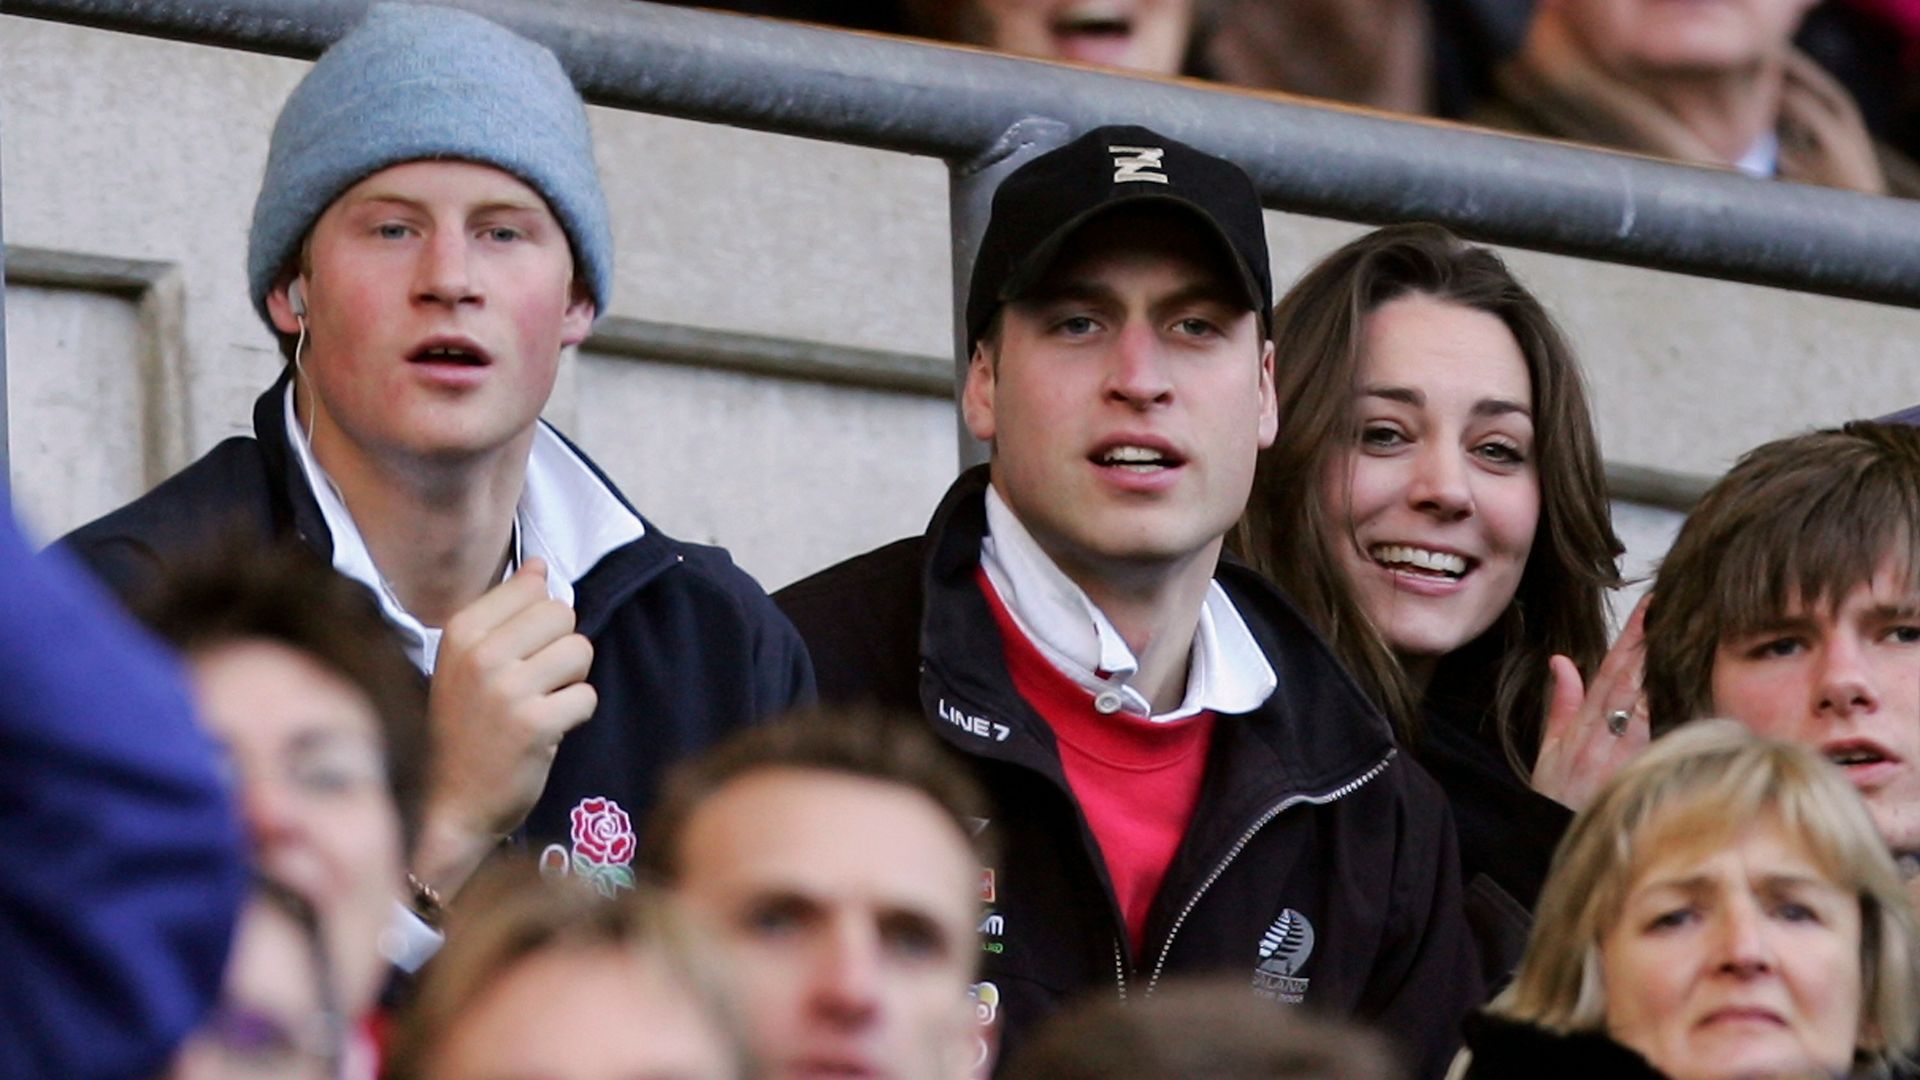 Prince Harry (L) and Prince William (C) and Kate Middleton (R) watch the action during the RBS Six Nations Championship match between England and Italy at Twickenham on February 10, 2007 in London, England.  (Photo by Richard Heathcote/Getty Images)